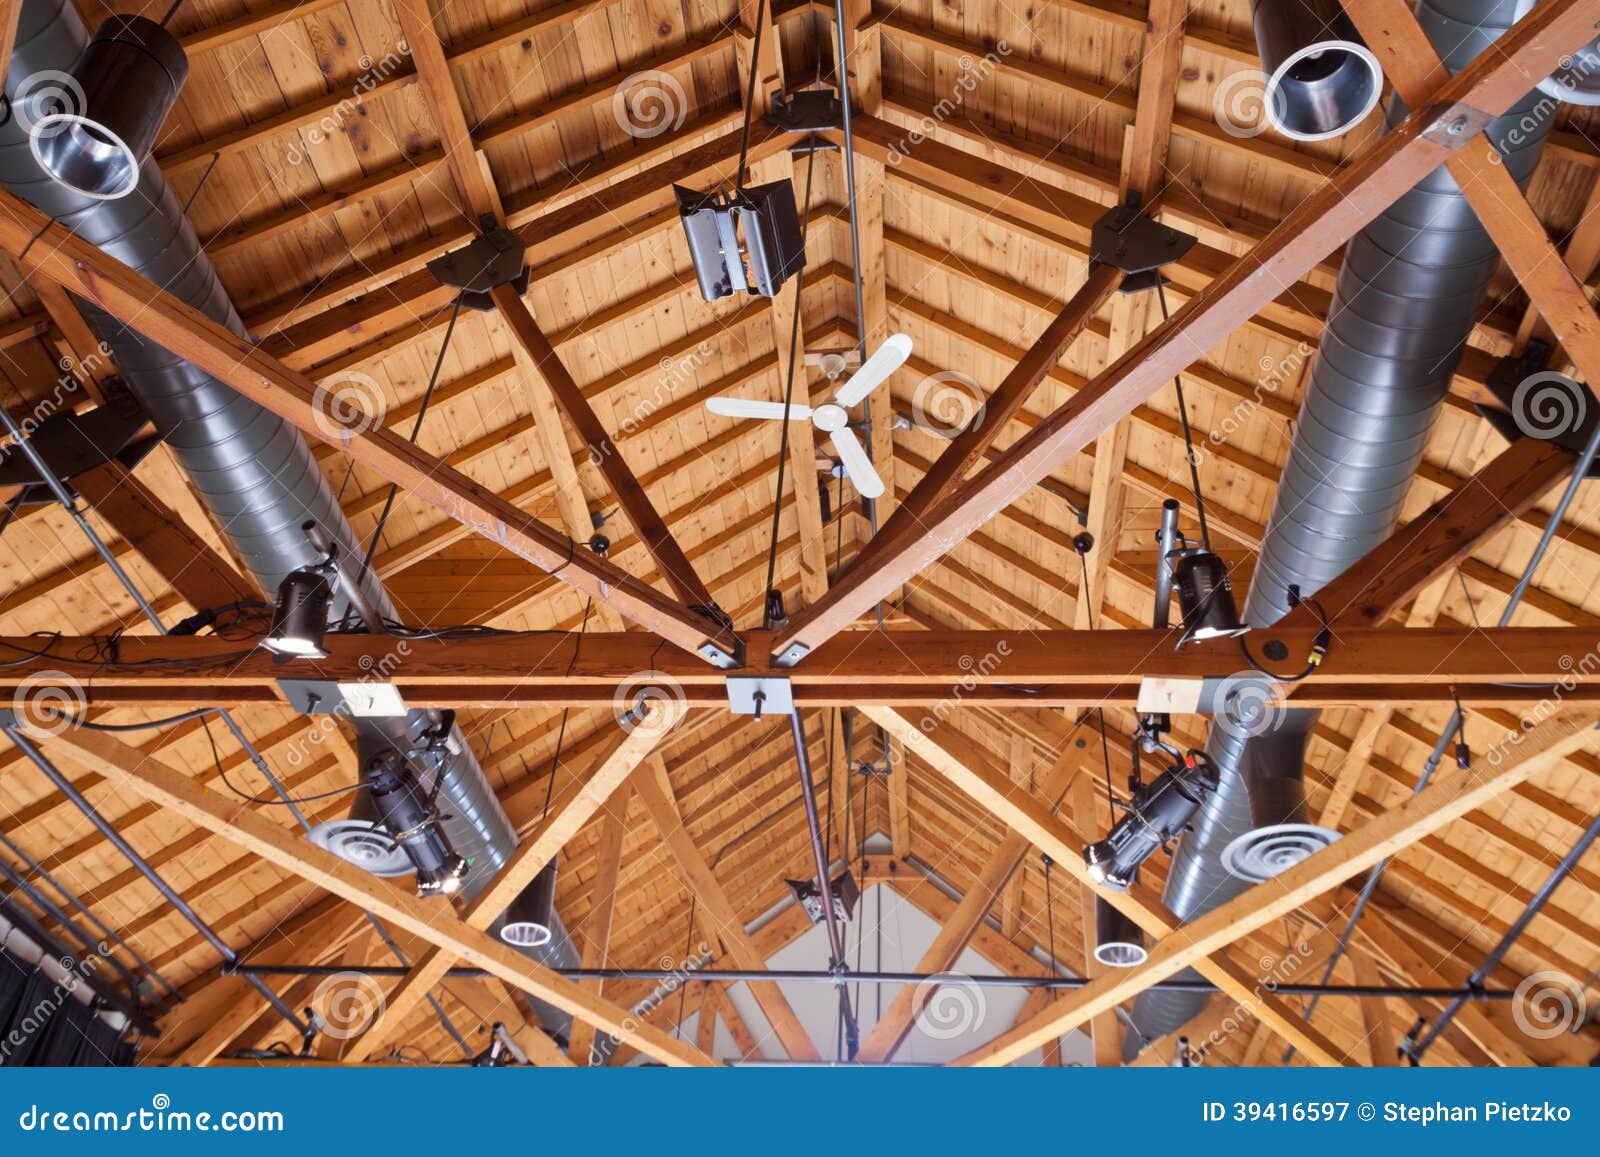 Timber House Ceiling Duct Lighting Installation Stock Image